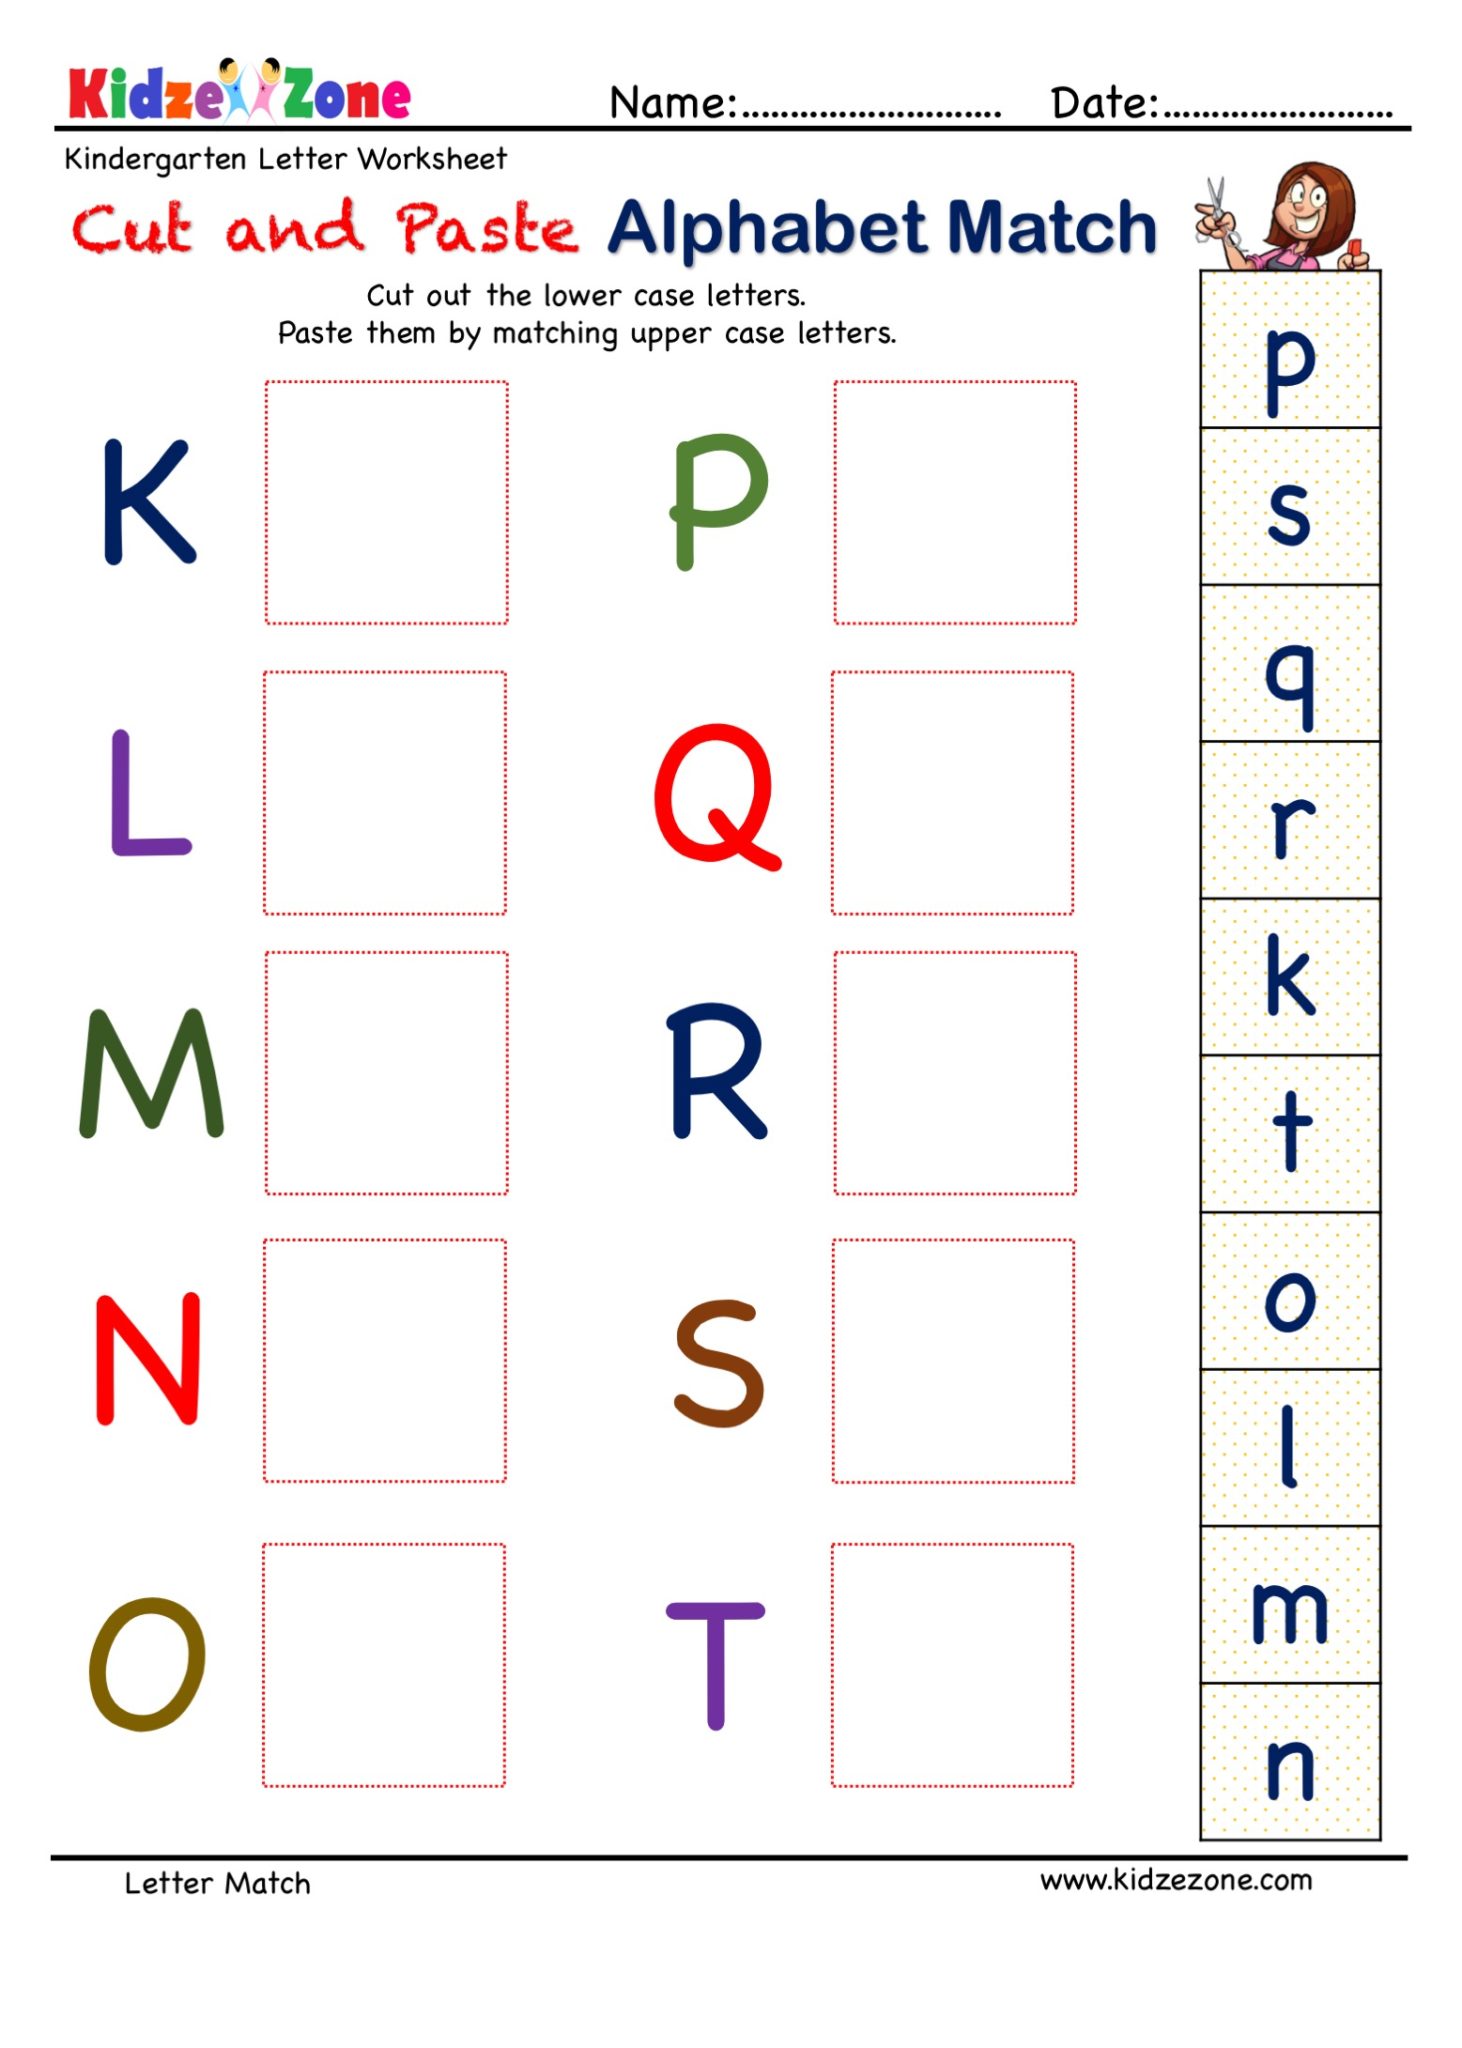 Preschool Letter Matching Cut and Paste Activity Worksheet K to T